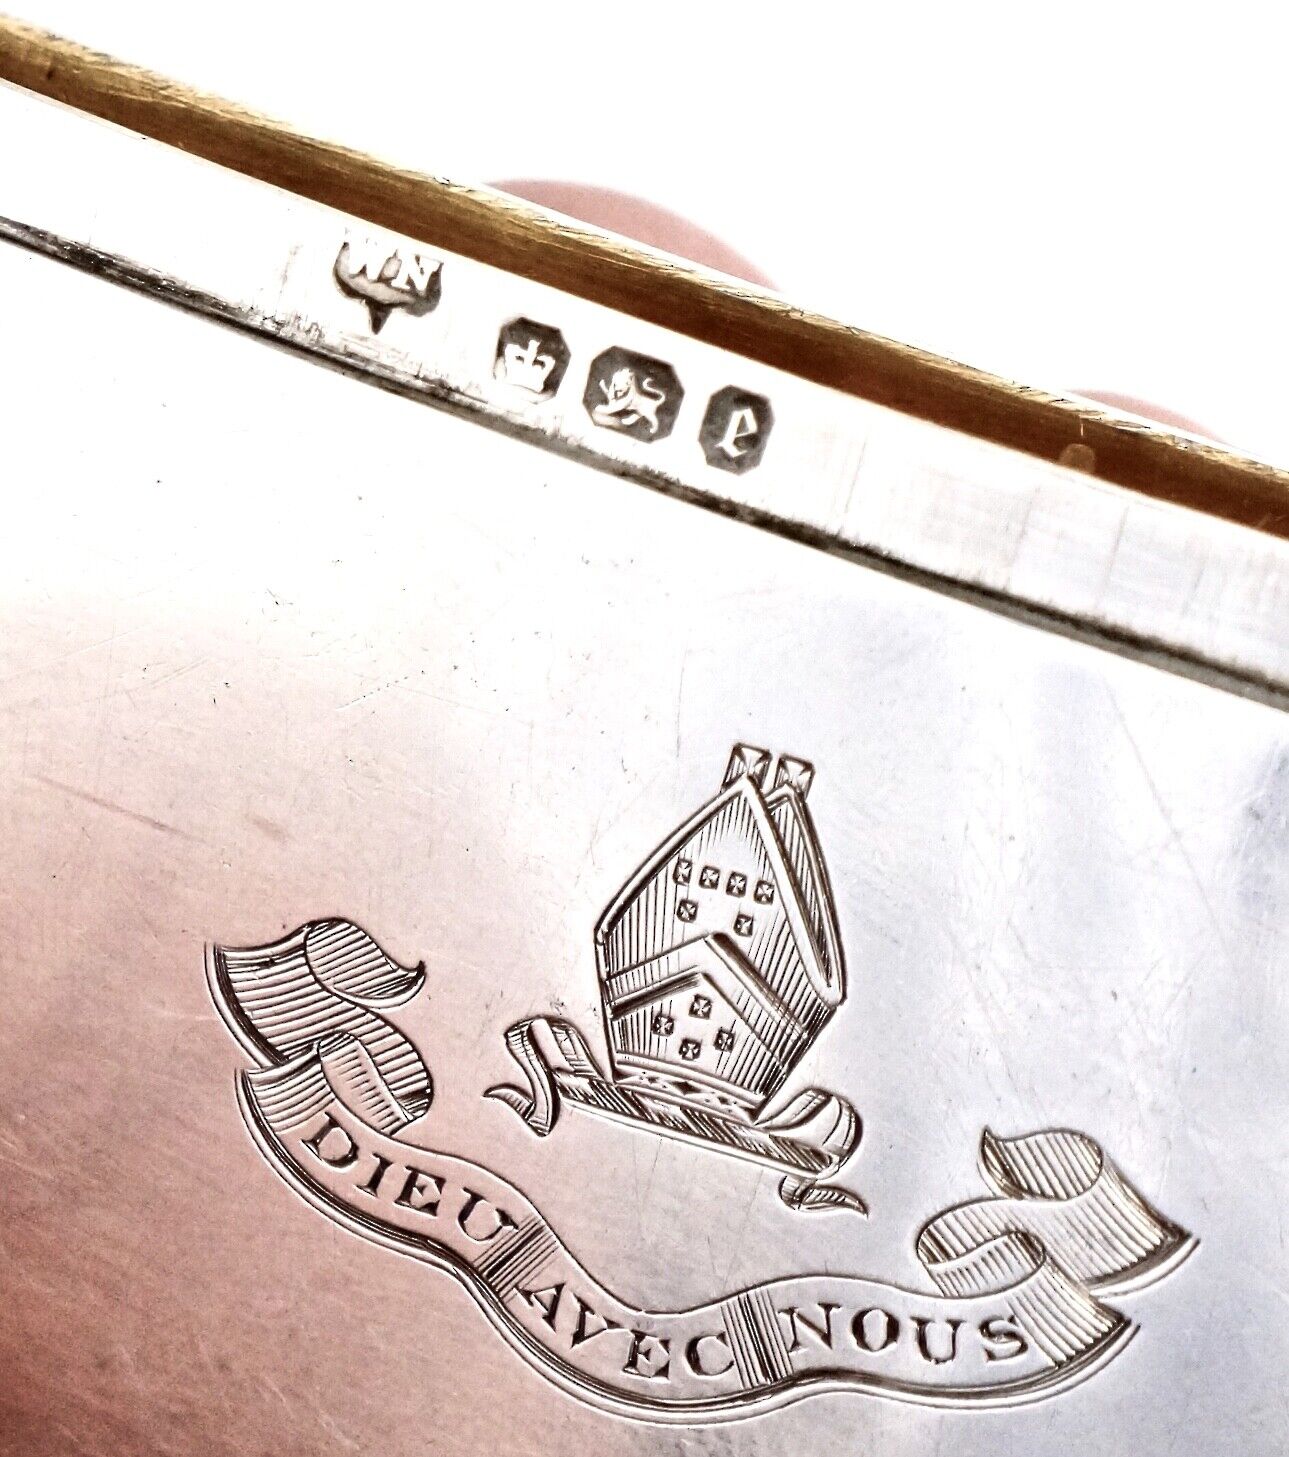 1897 Victorian Sterling Silver Card Case with Bishop's Mitre Armorial Crest.